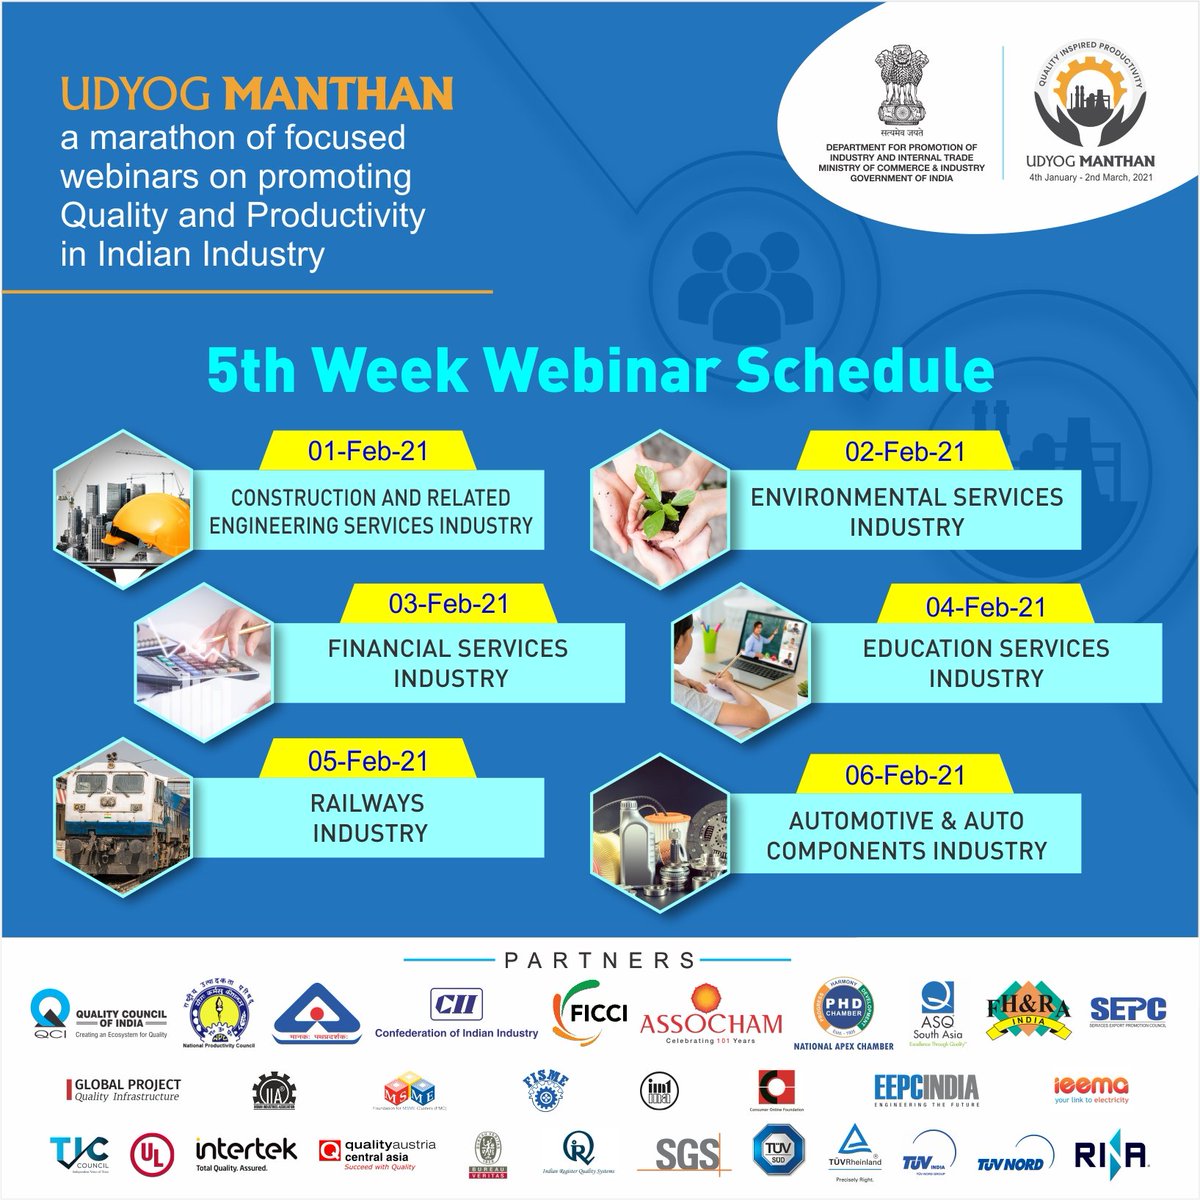 Block your calendar for the 5th week of #UdyogManthan webinars.
Join this marathon series of sector-specific webinars to gain expert insights on improving #Quality & #Productivity of the Industry. @NPC_INDIA_GOV
#AatmaNirbharBharat #India pic.twitter.com/wjaQuLsvRP